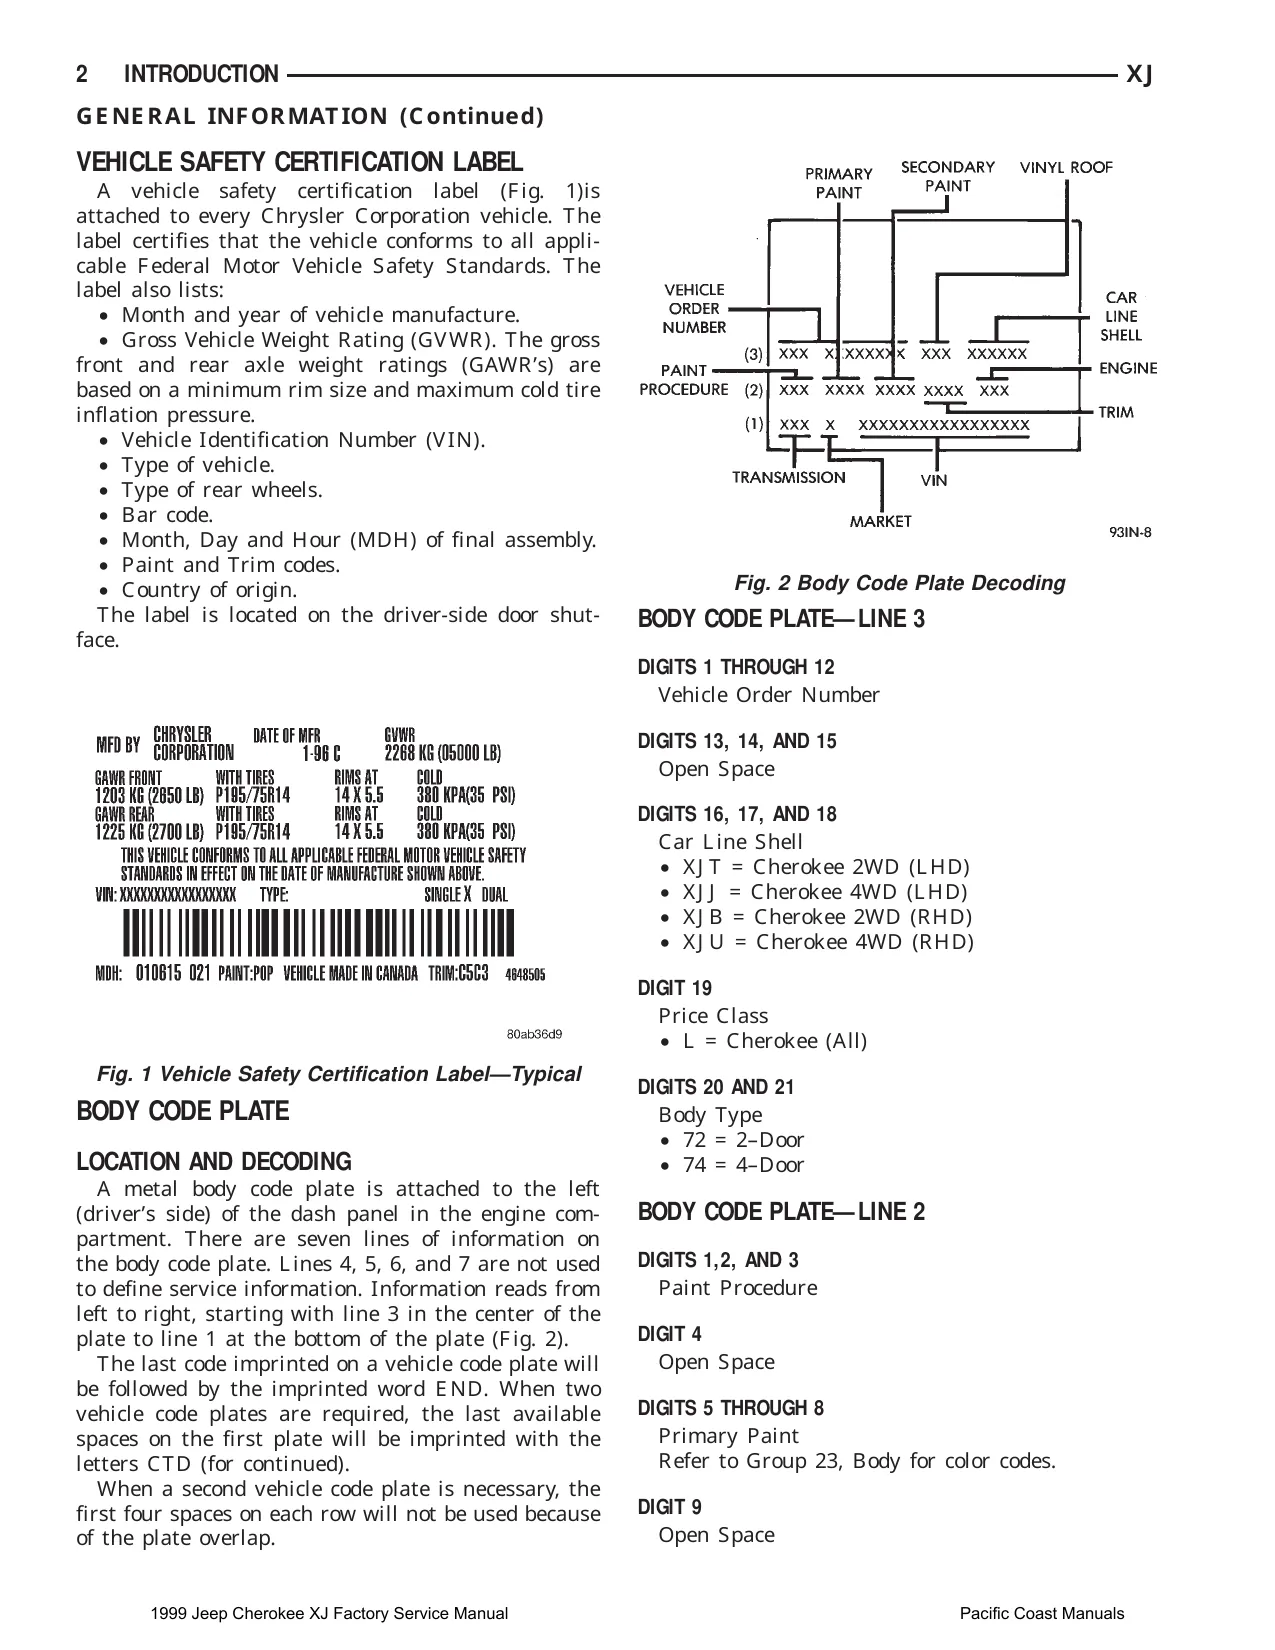 1999 Jeep Cherokee XJ, SE, Sport, Classic, and Limited Series, 2.5L, 4.0L factory service manual Preview image 4